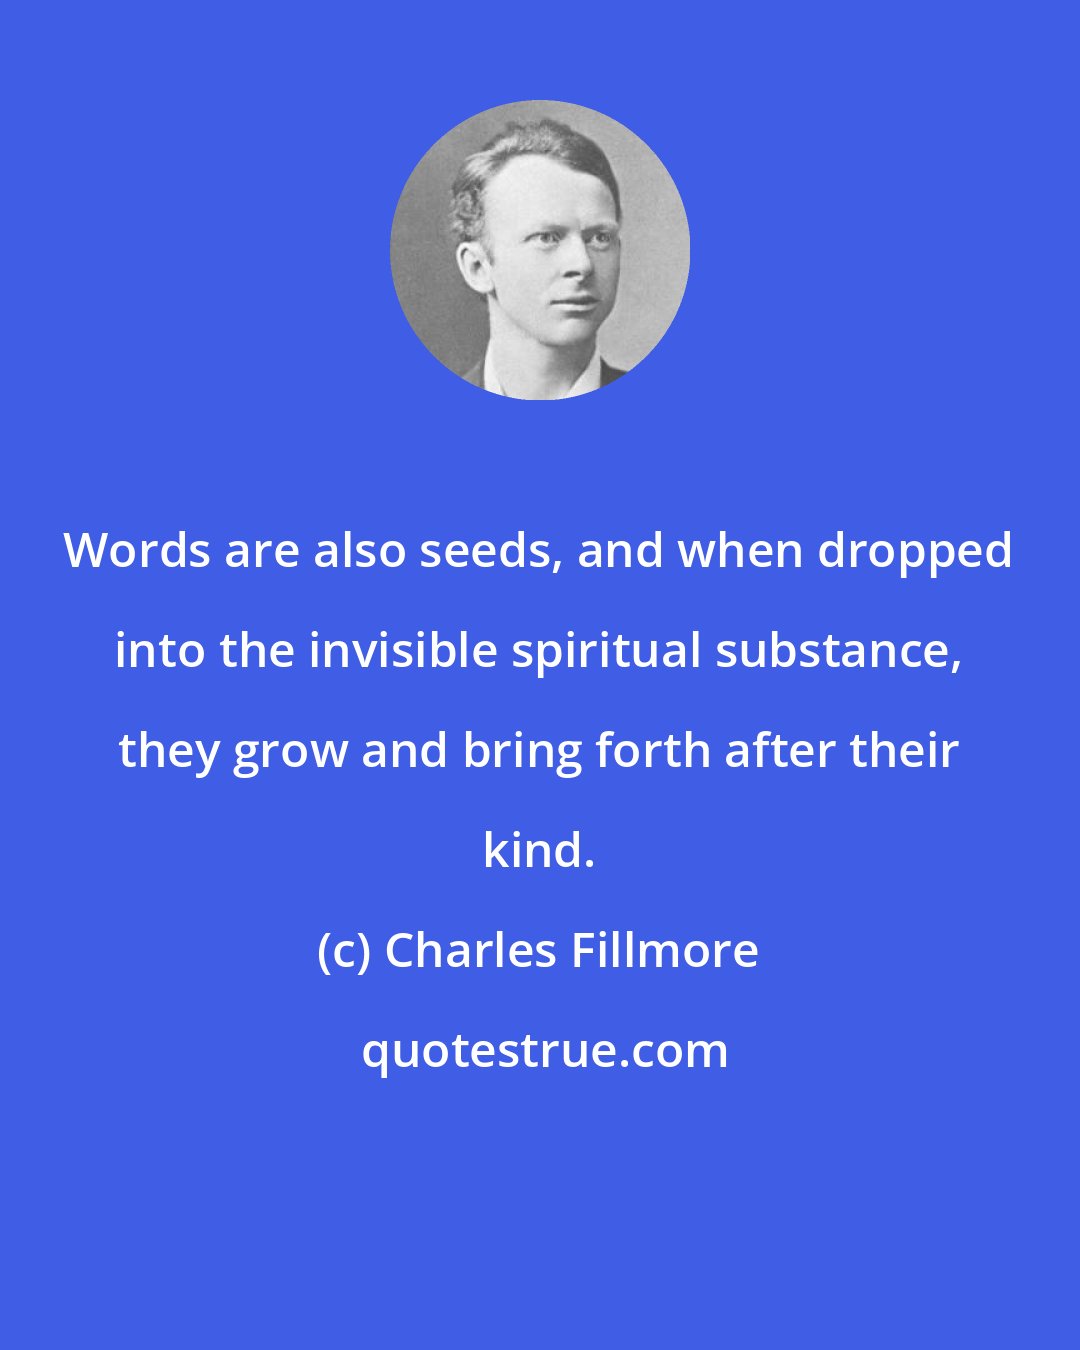 Charles Fillmore: Words are also seeds, and when dropped into the invisible spiritual substance, they grow and bring forth after their kind.